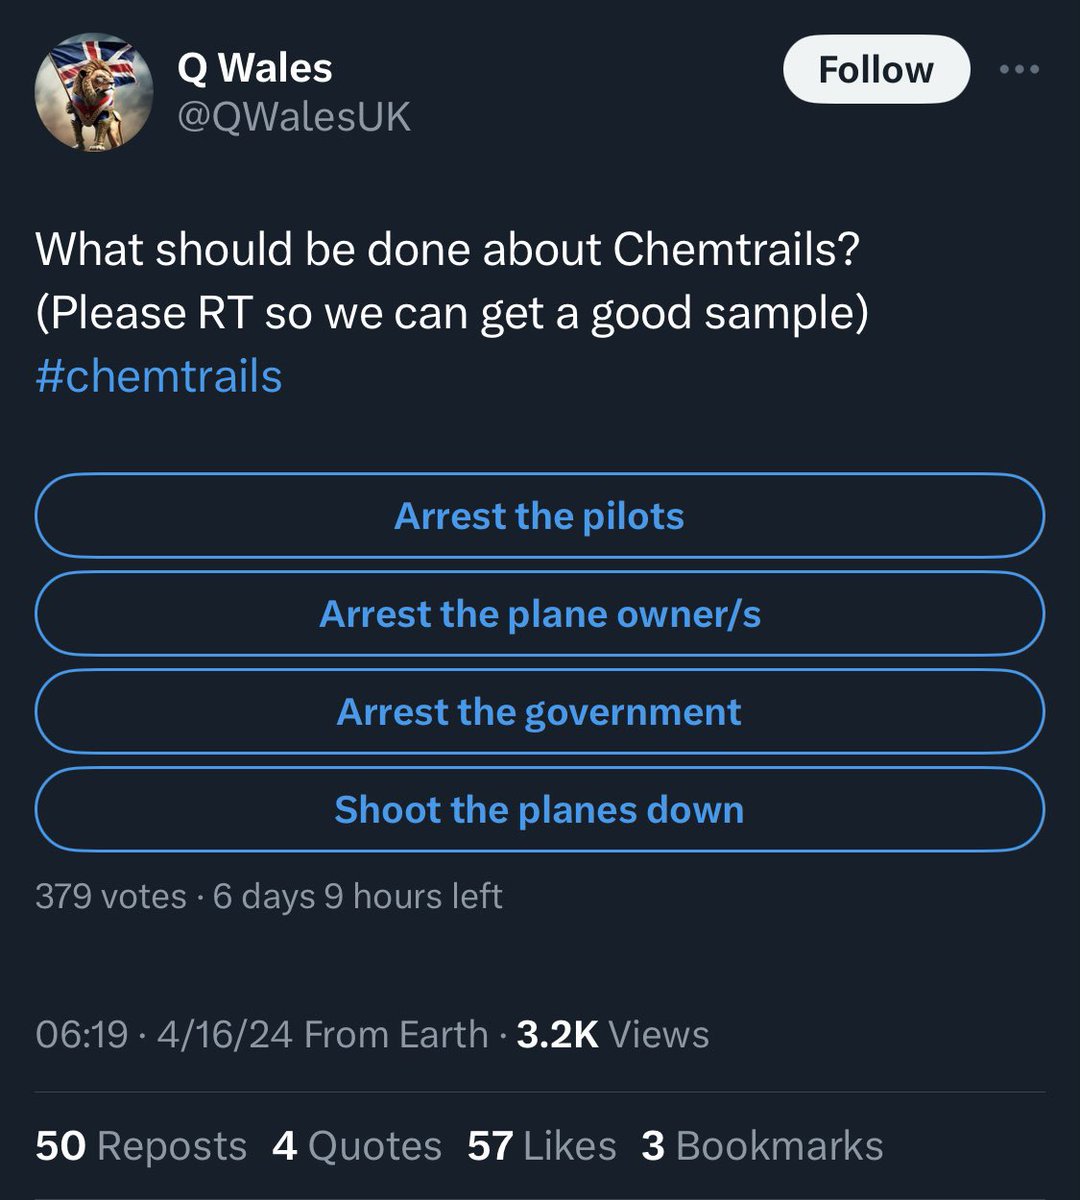 Eventually the chemtrails thing will inspire someone who is mentally unstable to take action